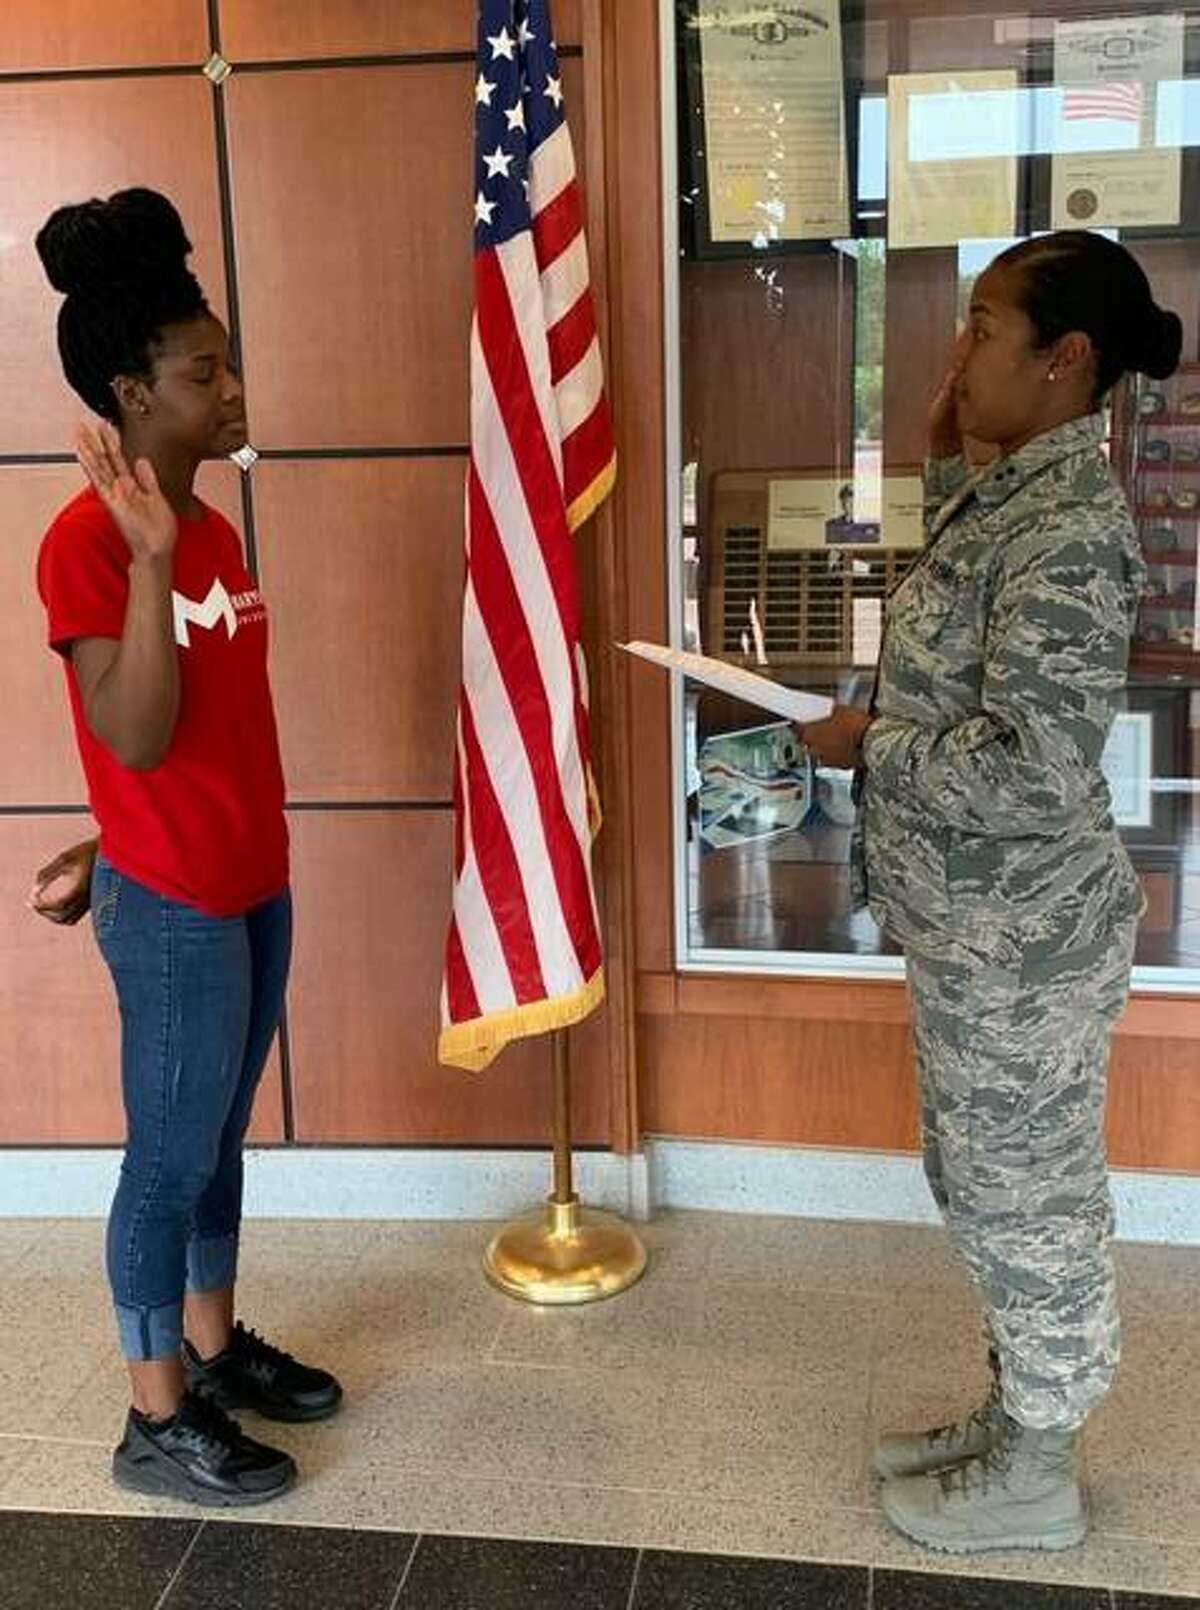 Belleville native Alayah Douglas enlisted in the Illinois Air National Guard during a ceremony on June 3 at Scott Air Force Base. Douglas enlisted into the 126th Air Refueling Wing - Mission Support Group and will serve as a Personnel Airman